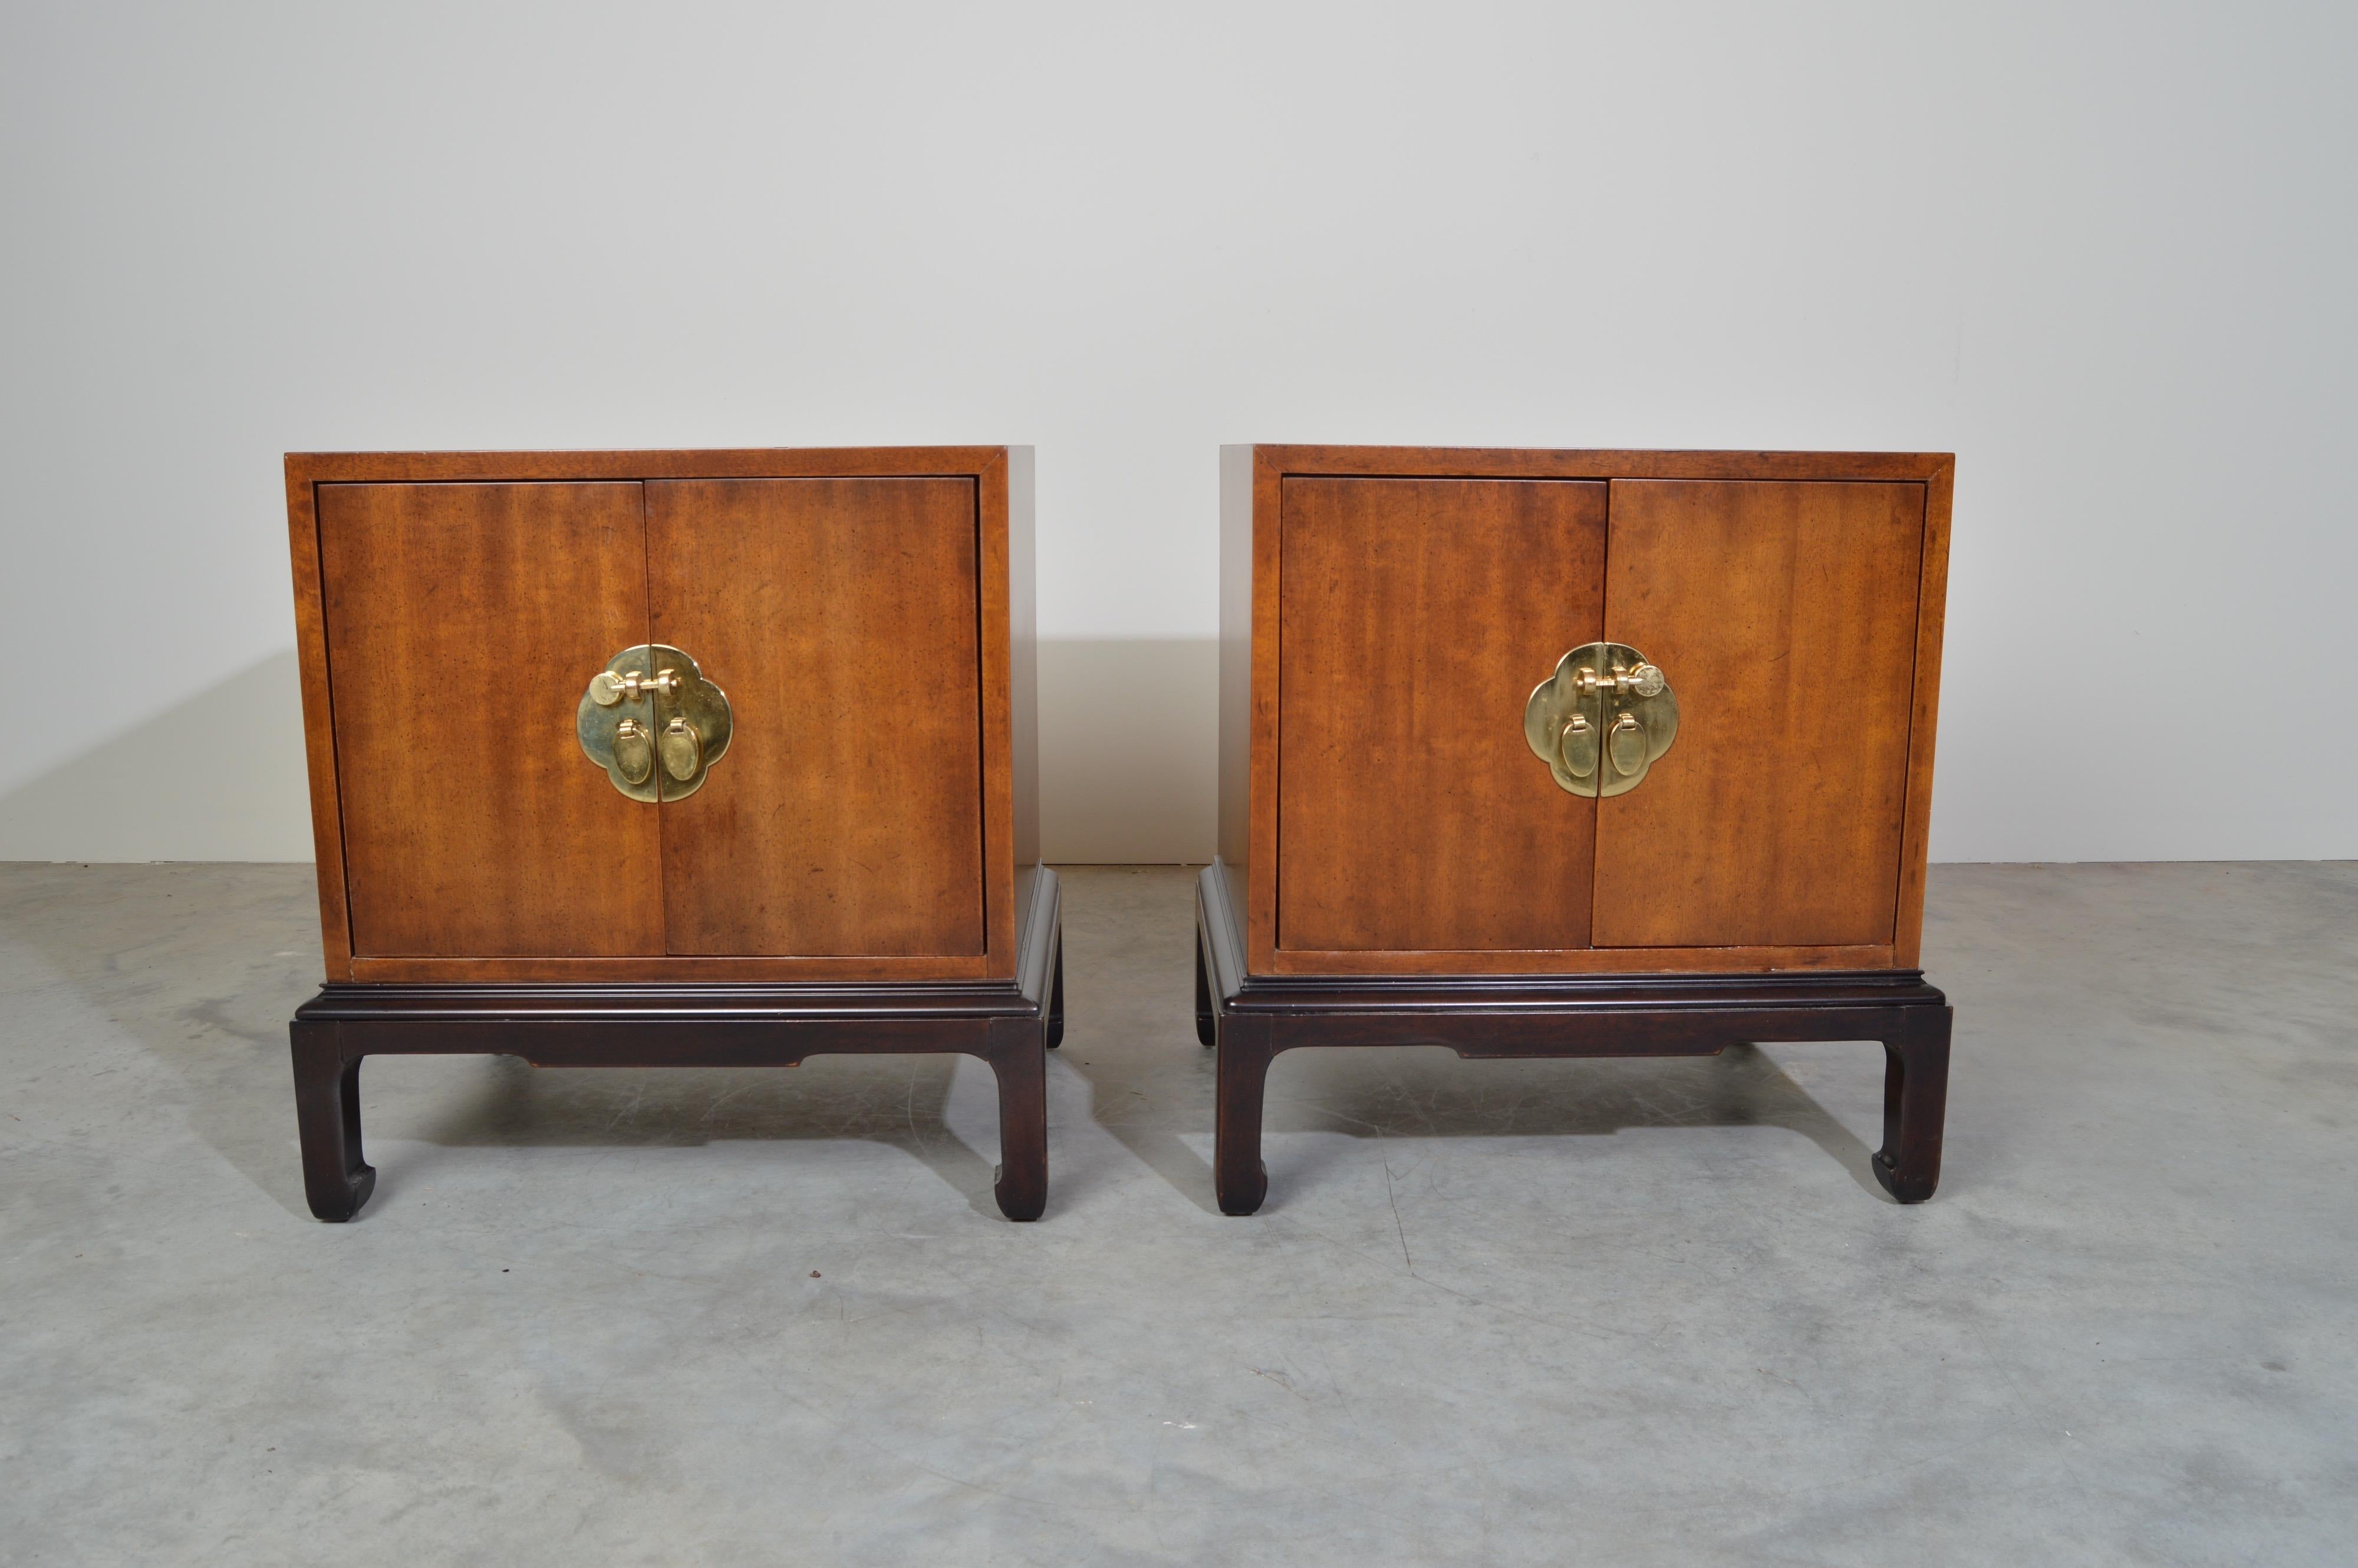 A pair of Ming dynasty influenced nightstands in walnut designed by Michael Taylor for Henredon of Morganton, North Carolina, USA. Made circa 1980. Each cabinet features a center shelf behind double doors with brass hardware and slide through brass